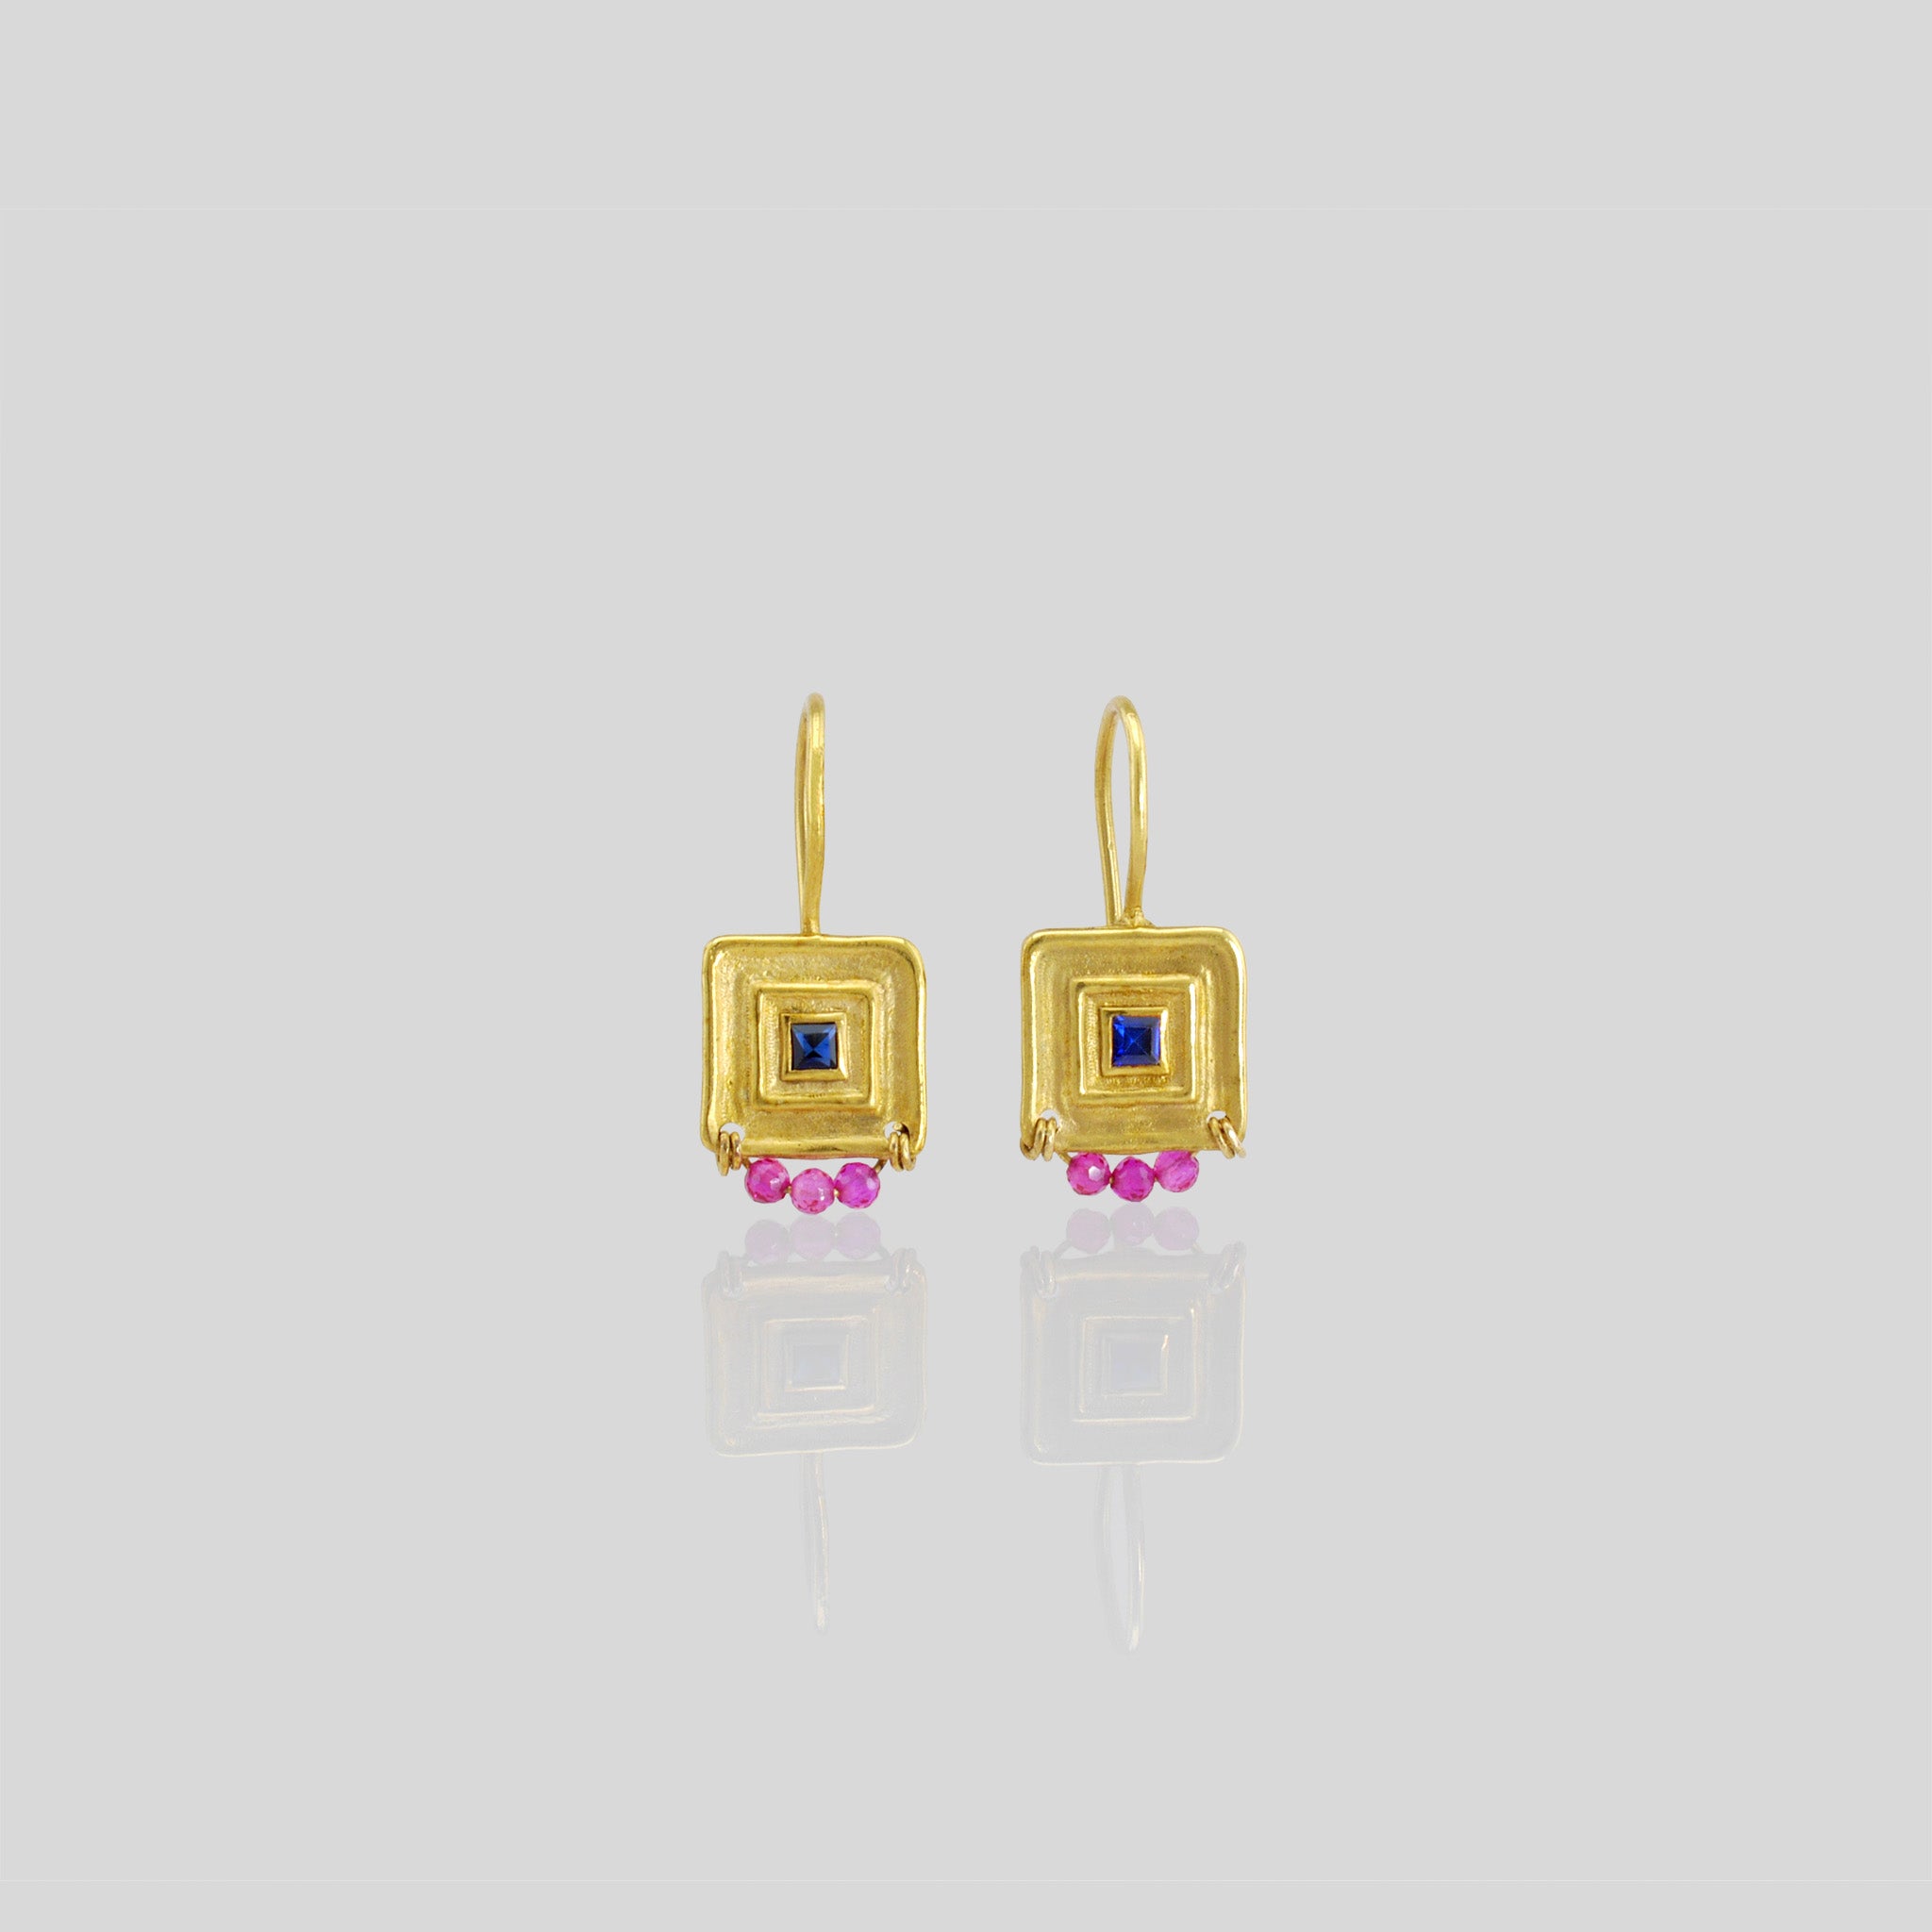 Unique gold square drop earrings featuring a square sapphire gemstone framed by a line pattern, with three hand-woven ruby beads at the bottom for an elegant Egyptian vibe.